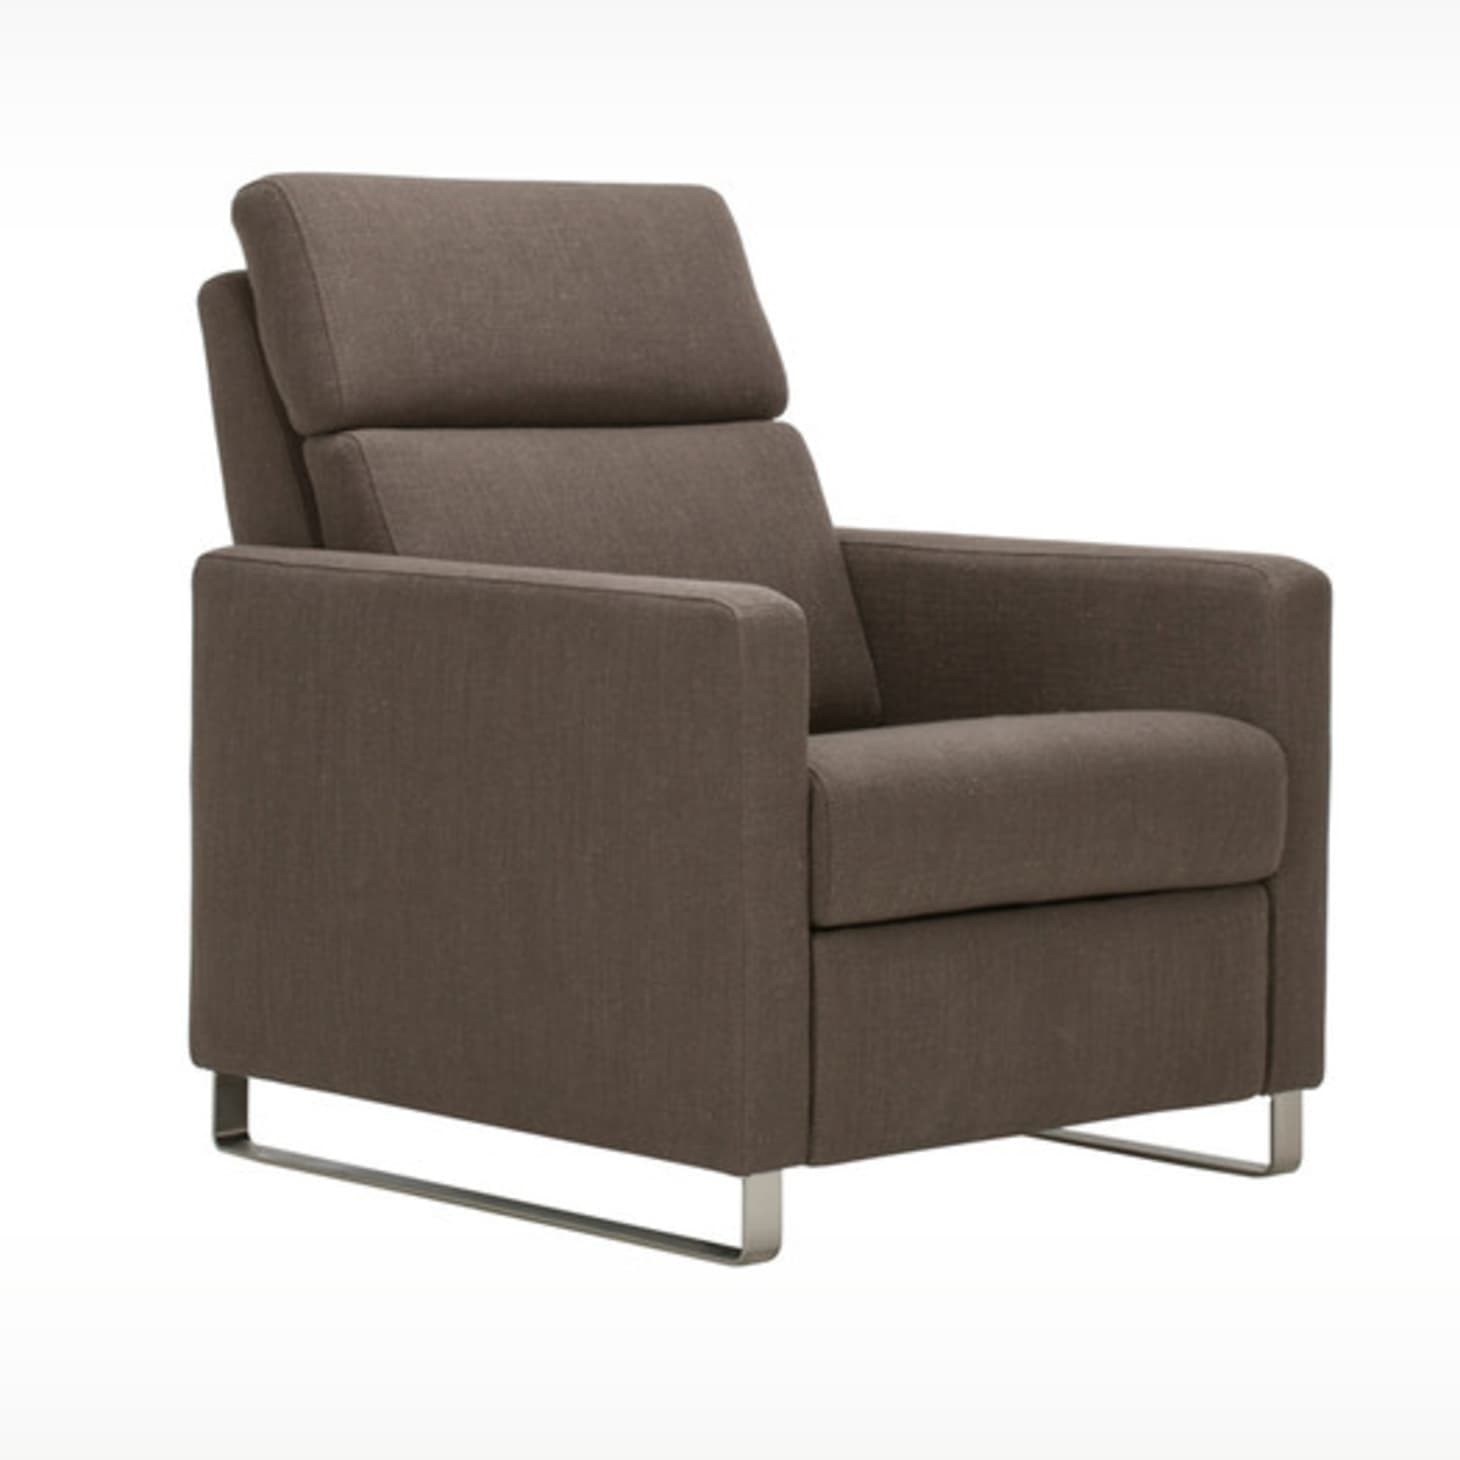 Attractive Modern Recliner Chairs Apartment Therapy 